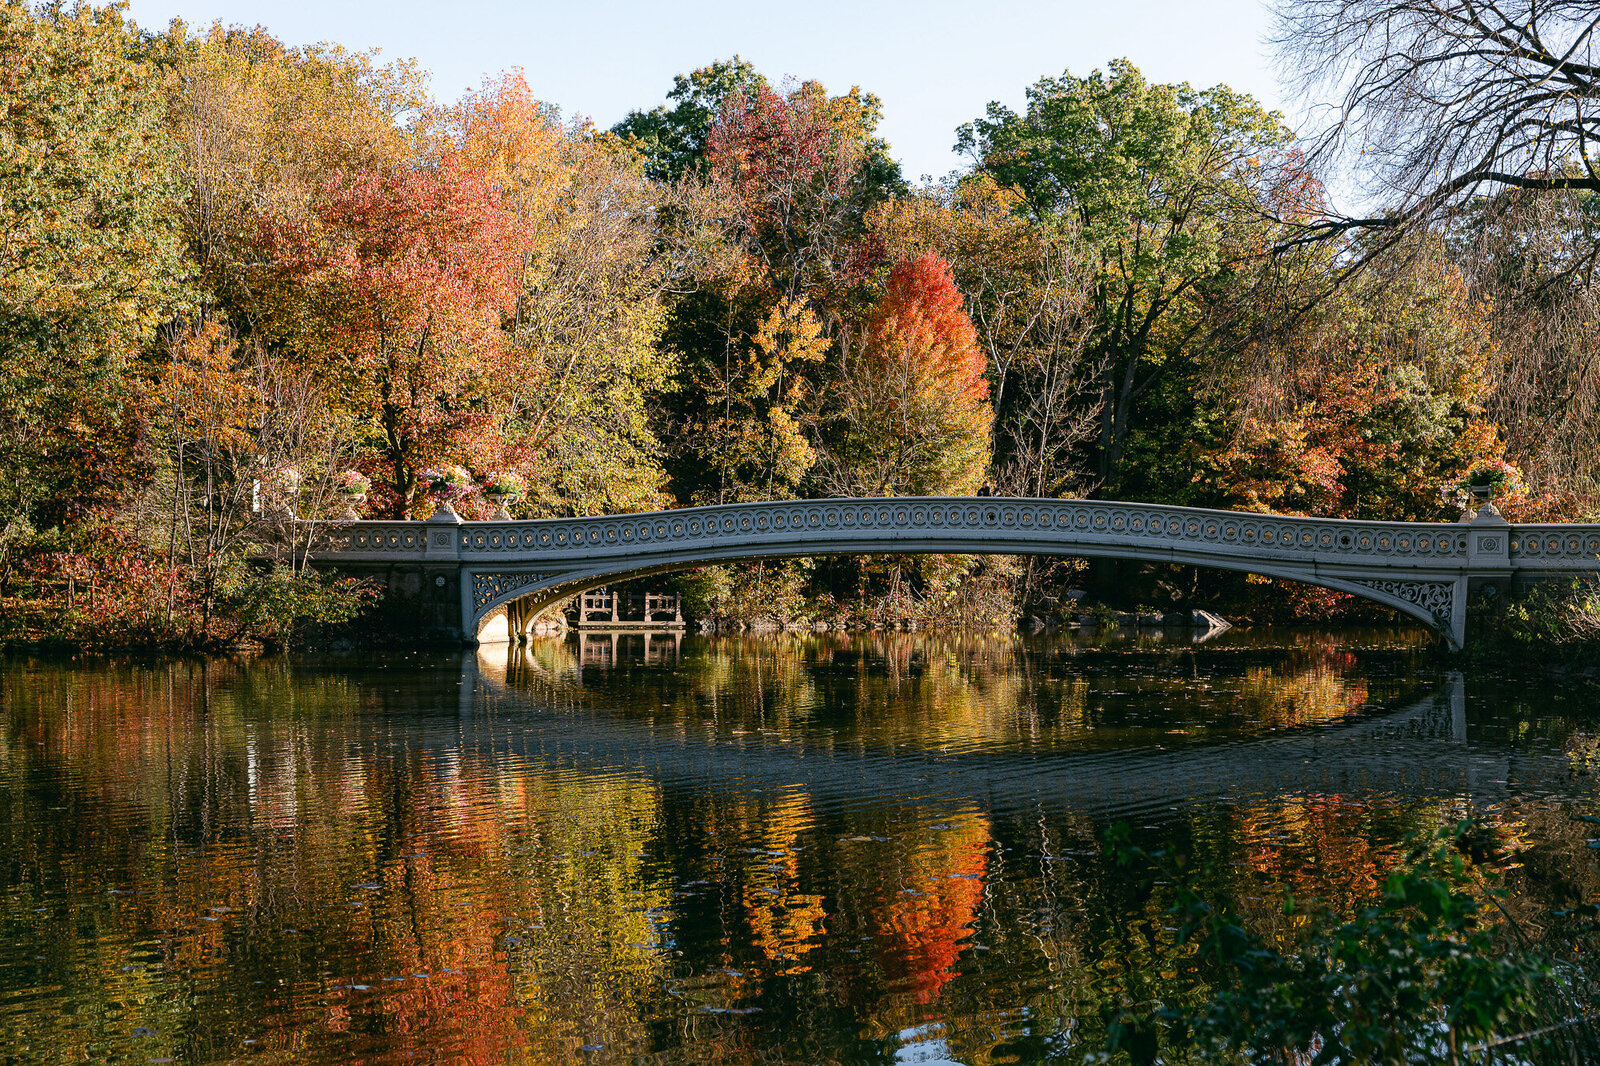 Central Park's bow bridge in the fall morning light